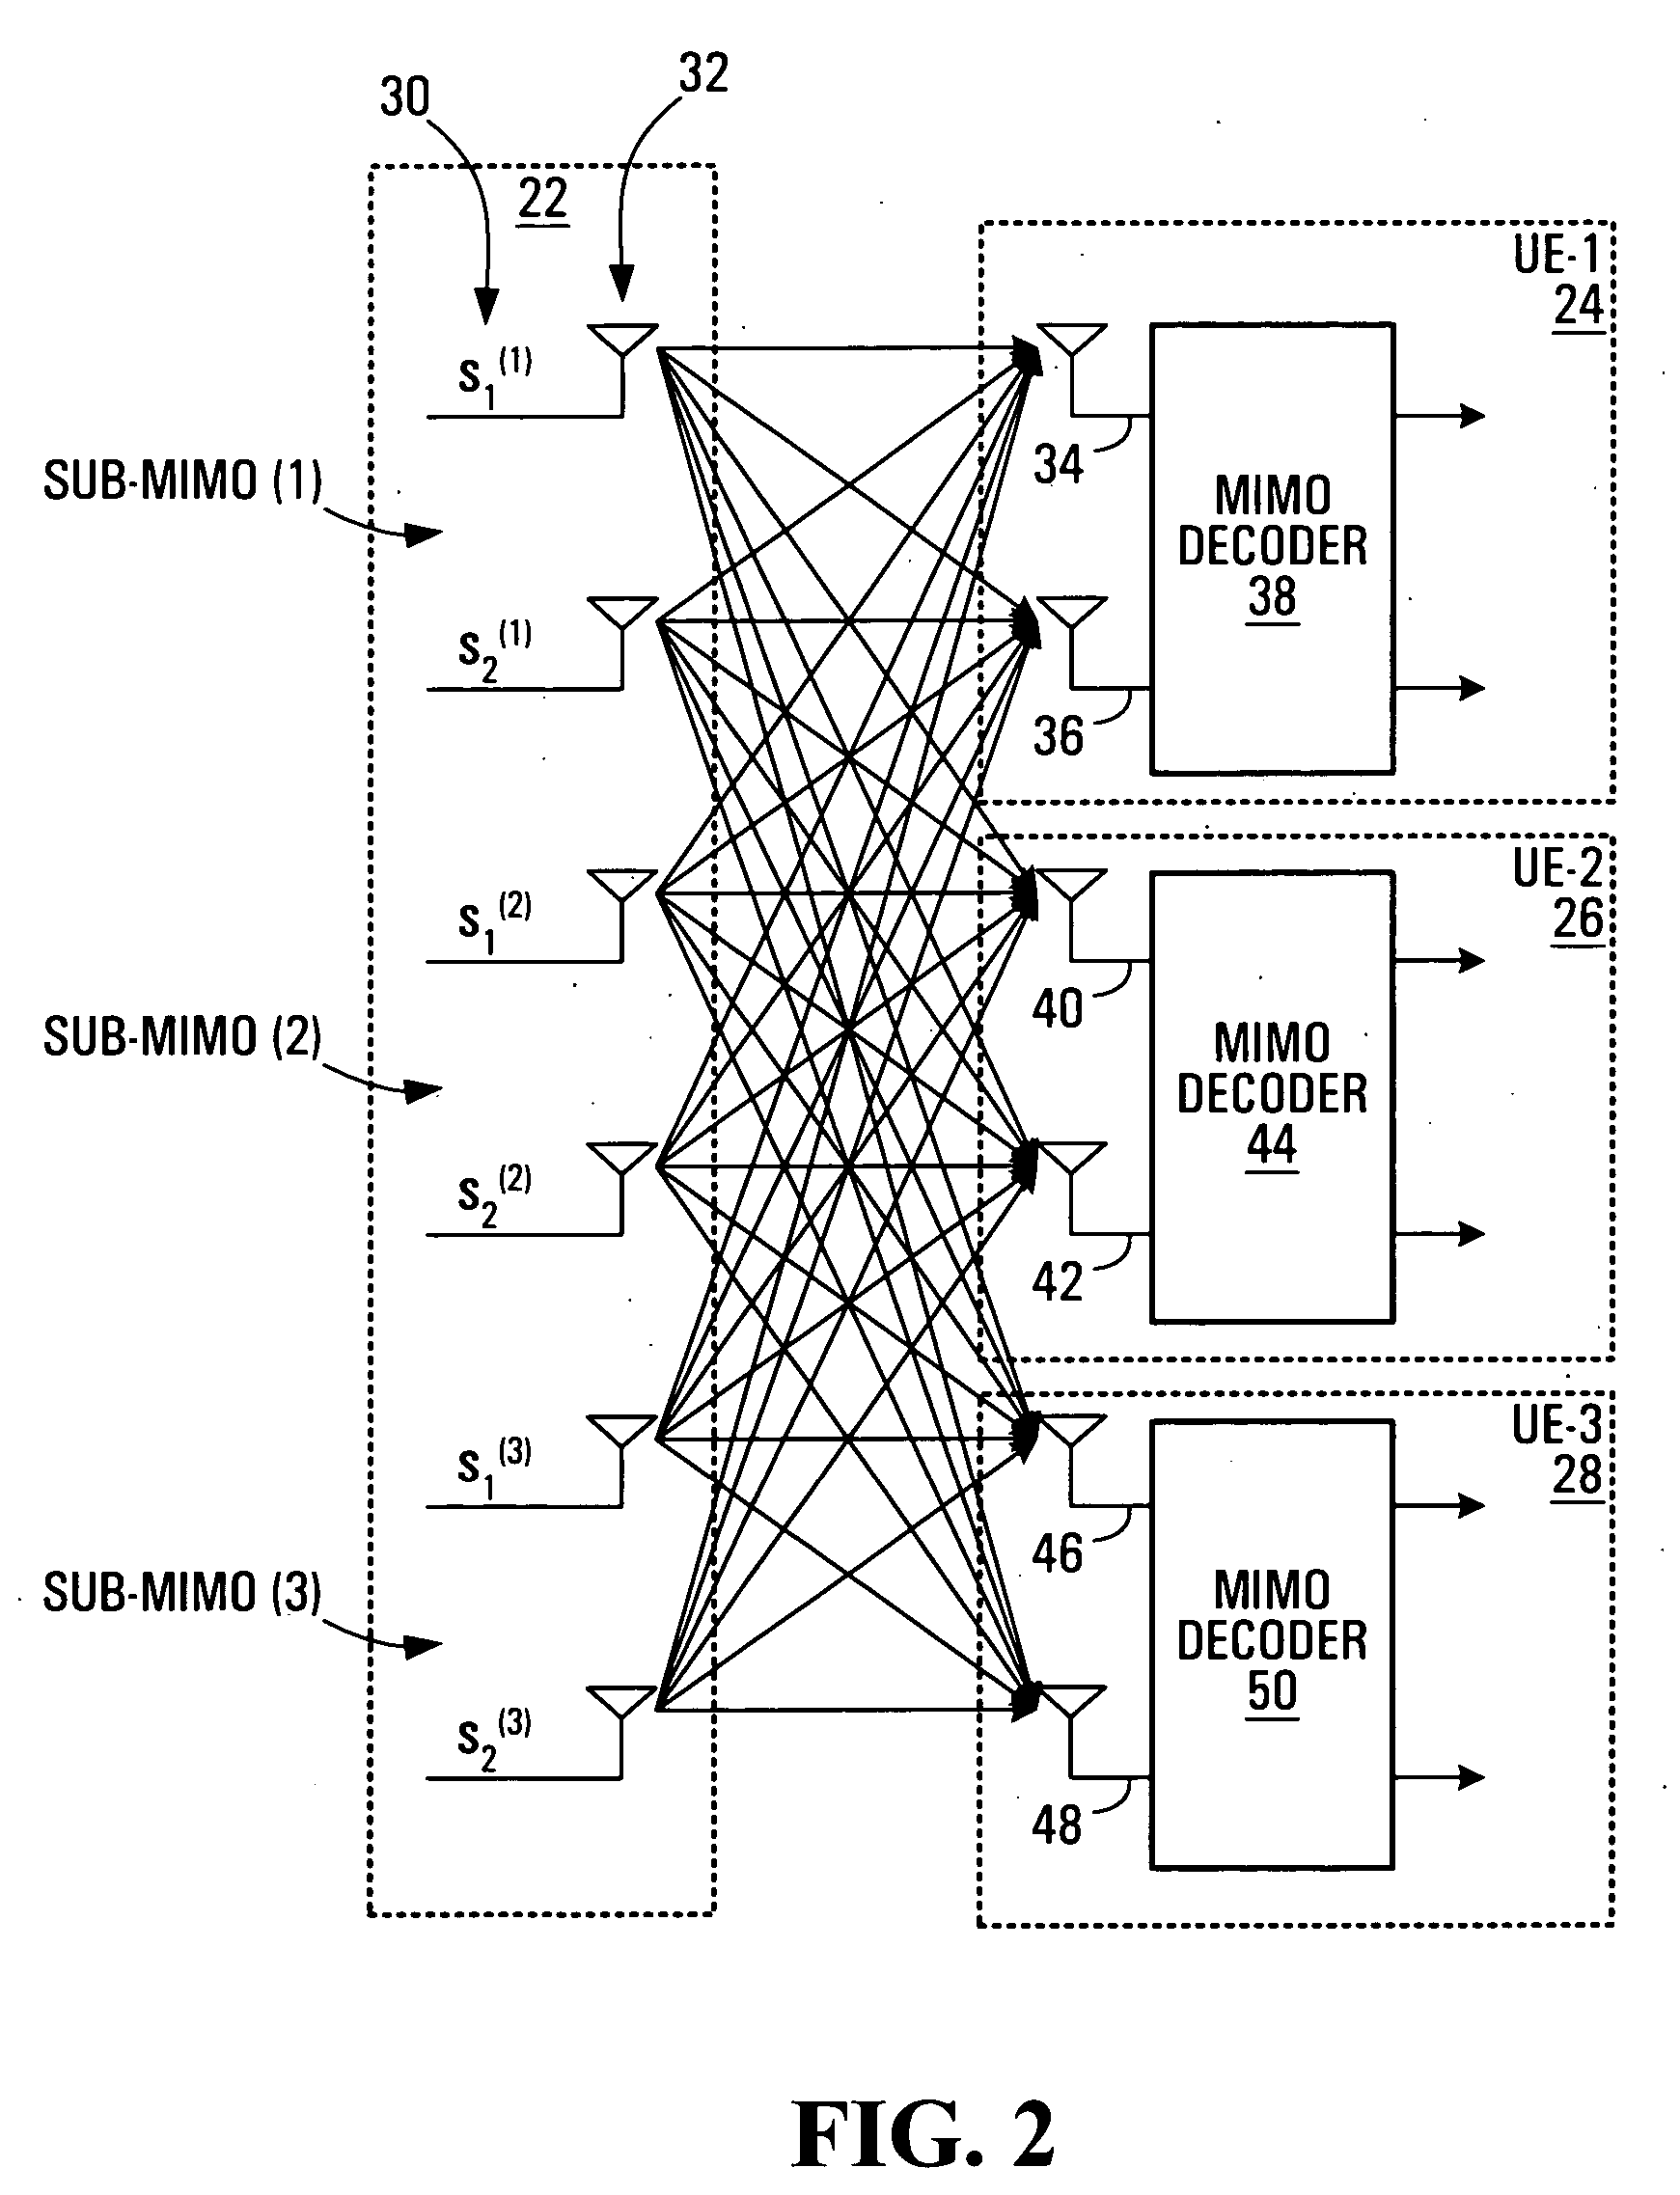 Communication channel optimization systems and methods in multi-user communication systems